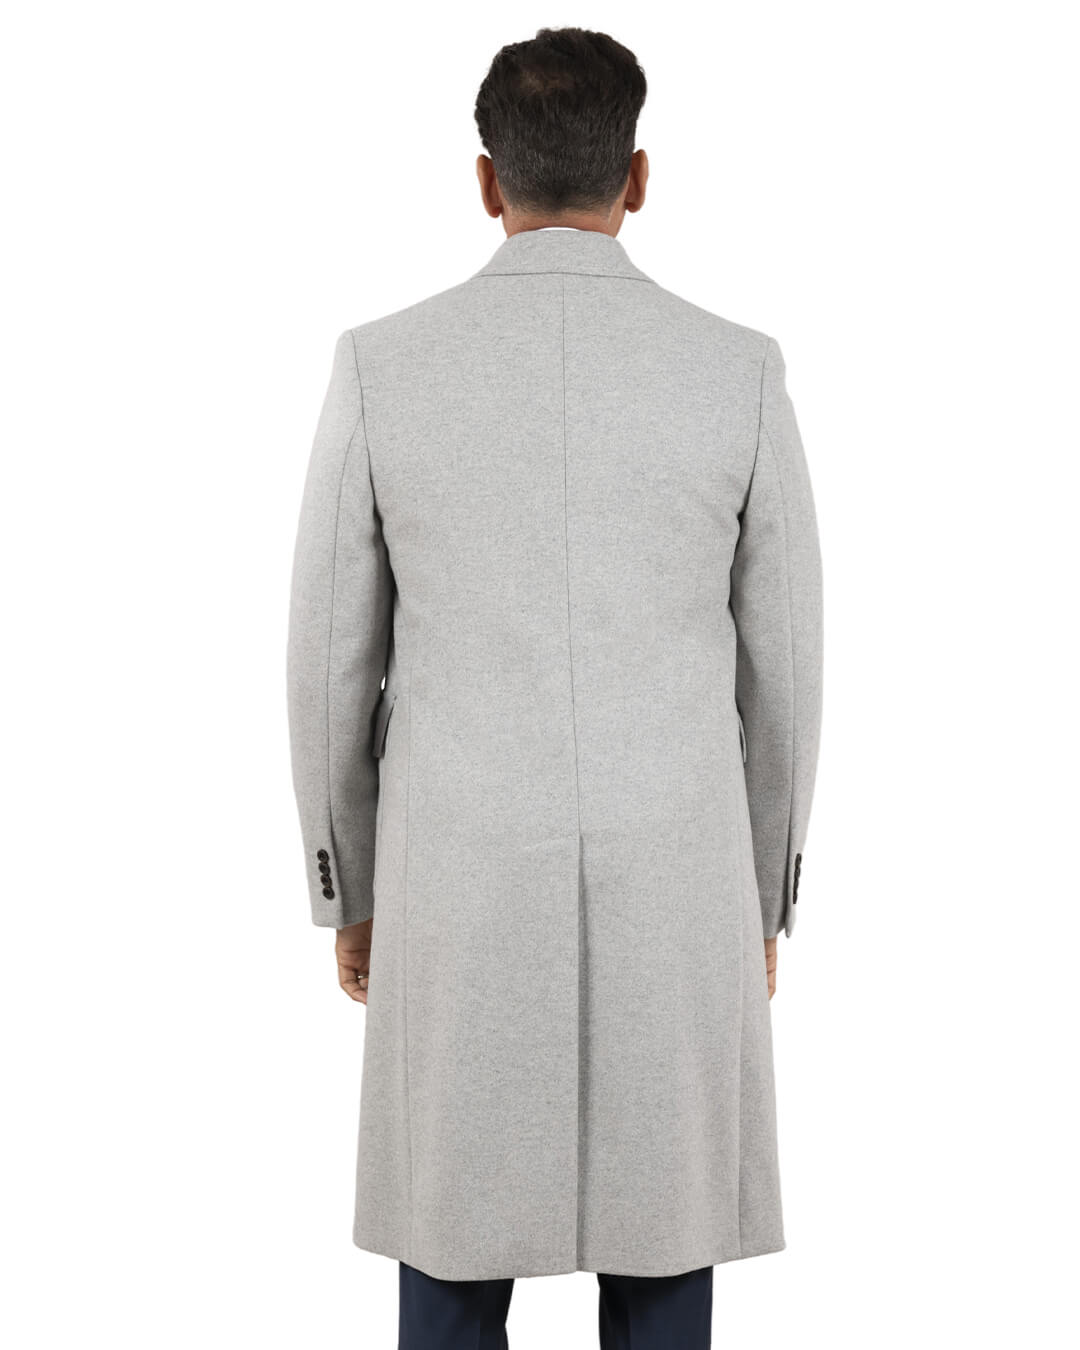 Silver Grey Double Breasted Coat